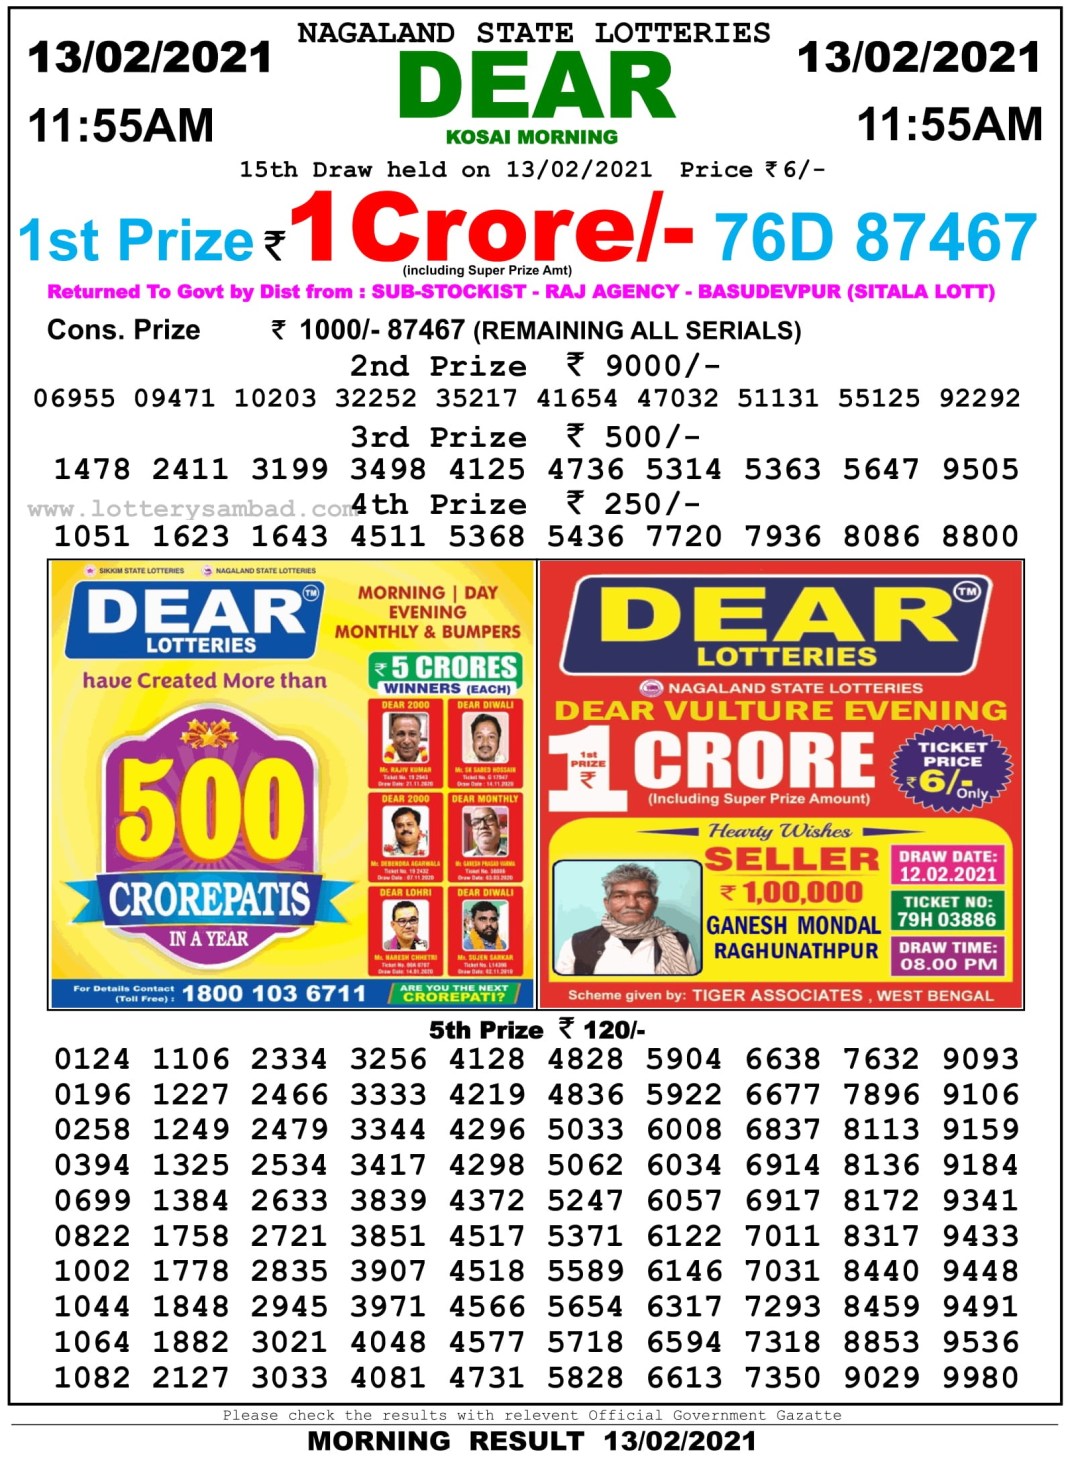 DEAR DAILY 1155AM LOTTERY RESULT 13.2.2021